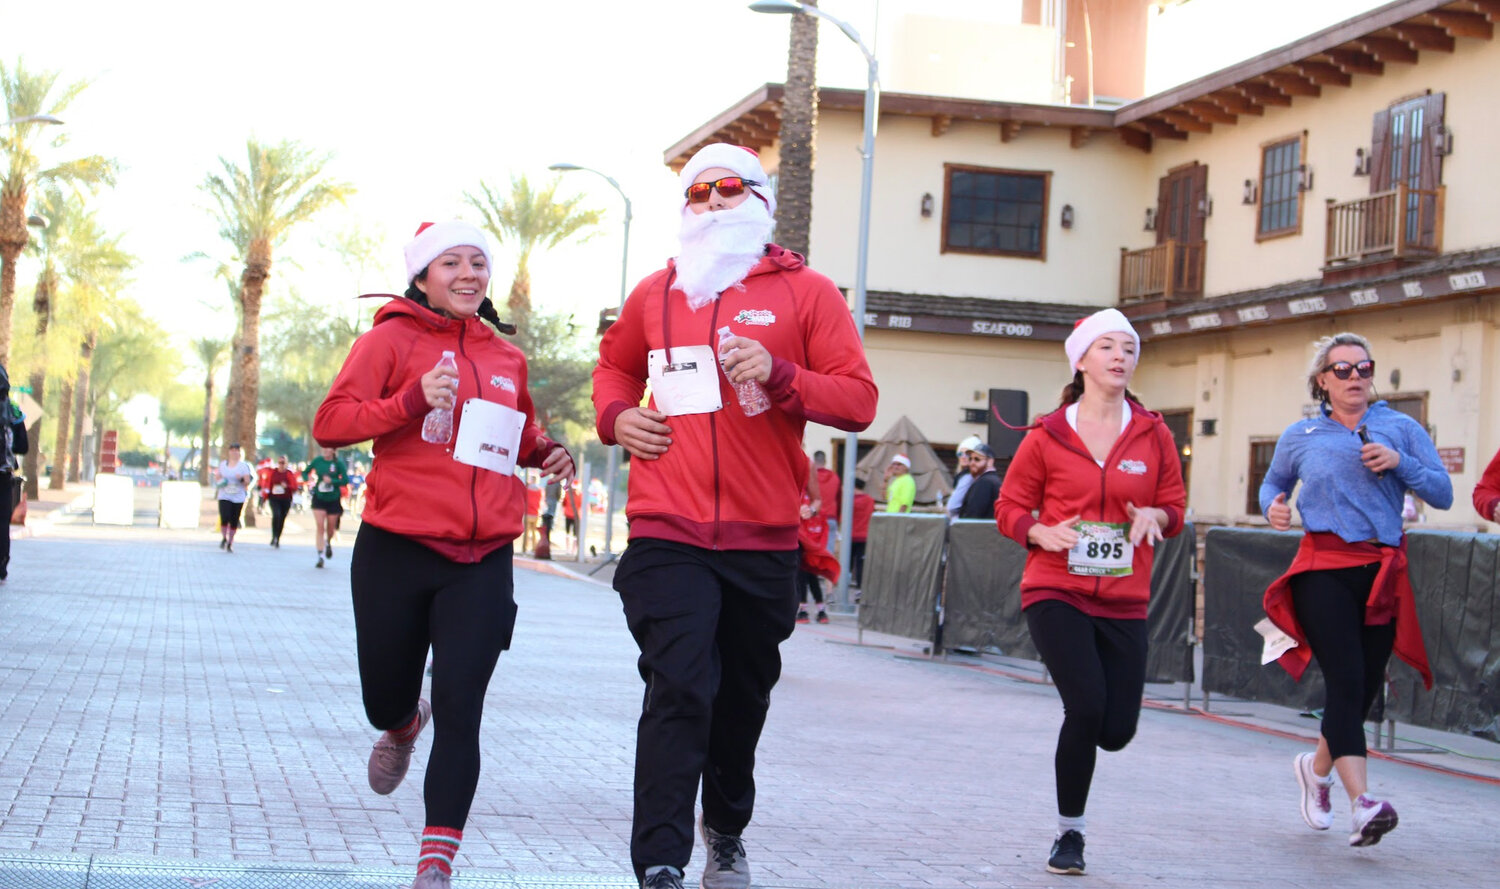 A look at a previous Santa Hustle at Westgate in Glendale.